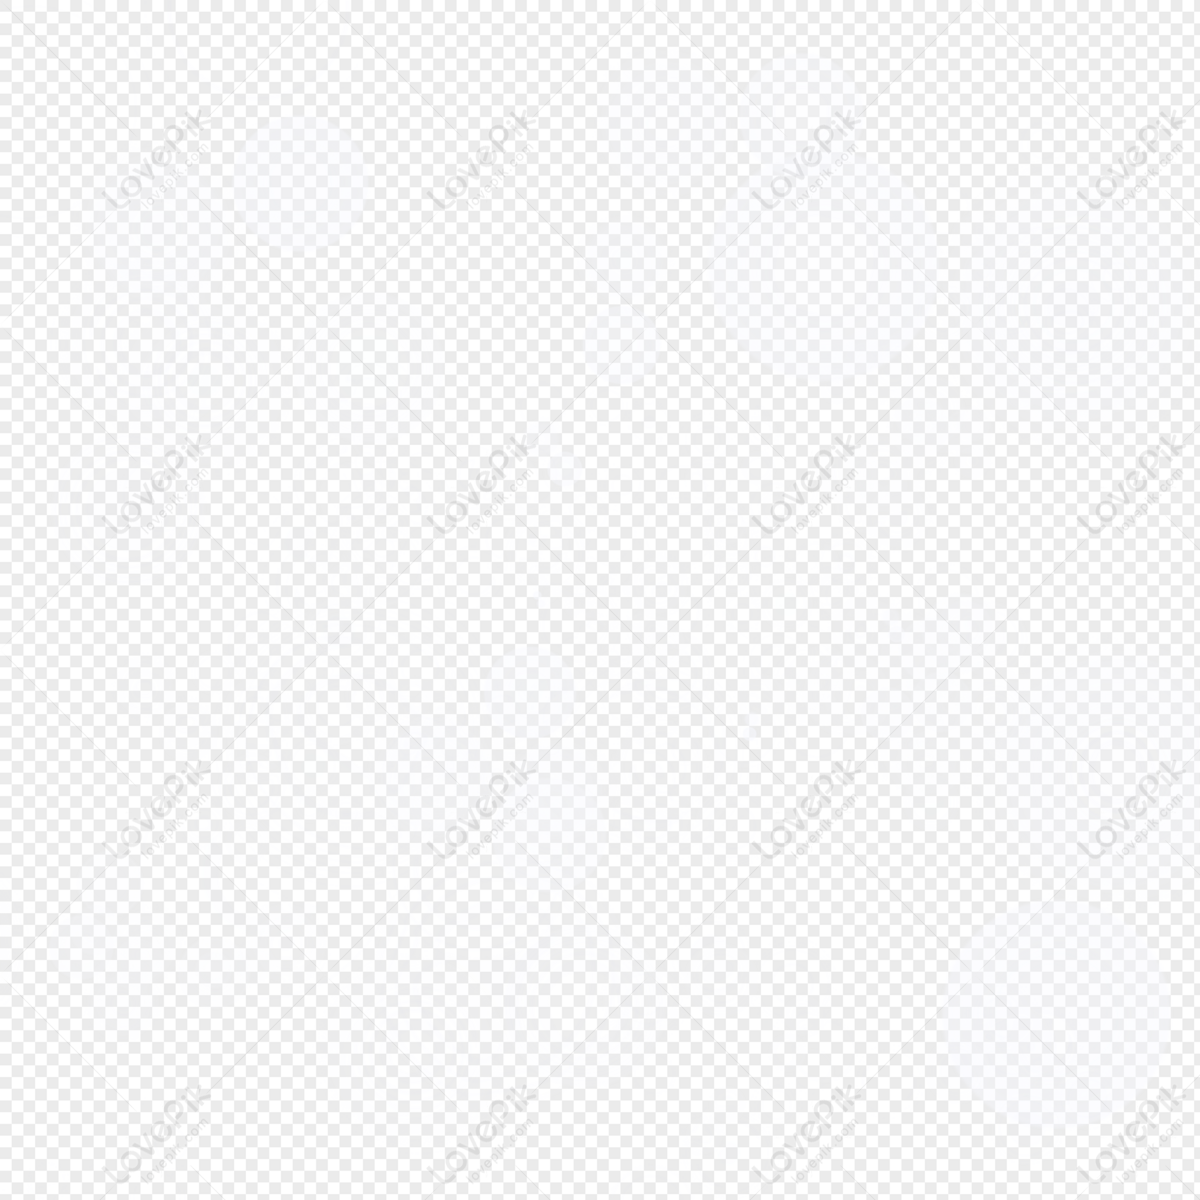 Bubble Aperture PNG White Transparent And Clipart Image For Free ...